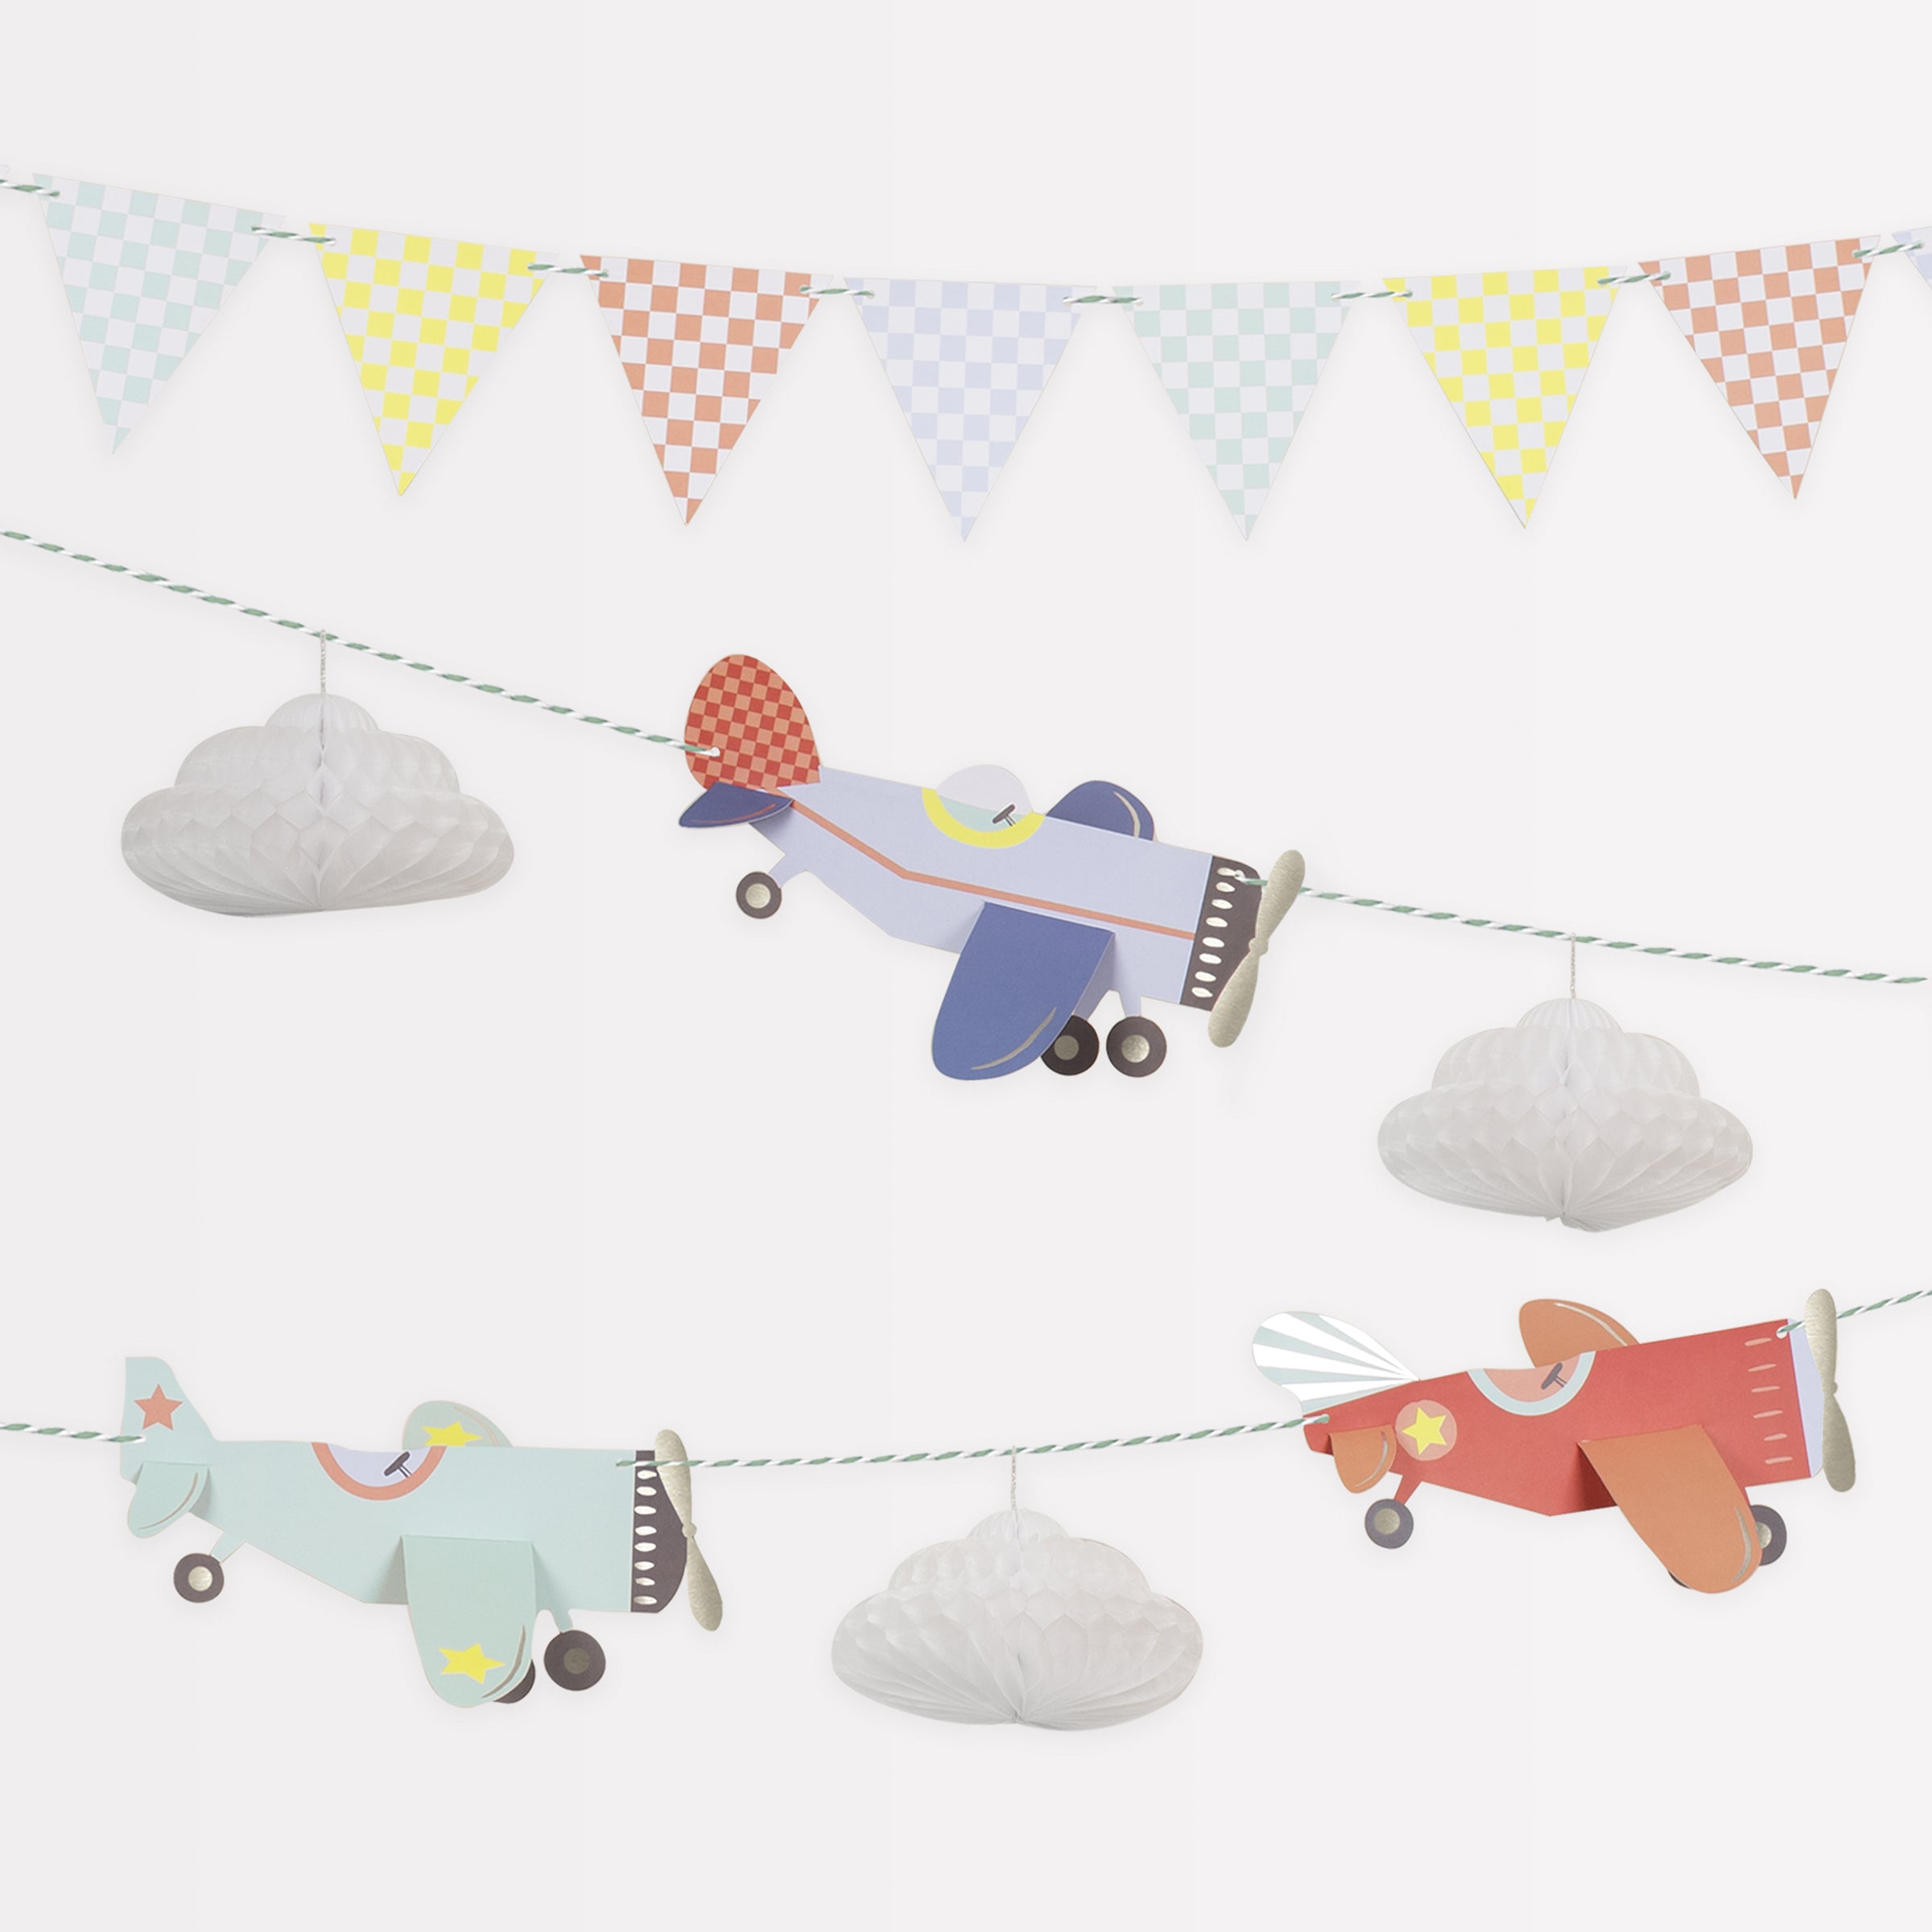 Our paper garland features 3D plans, clouds and checked pennants, ideal for an airplane birthday party.